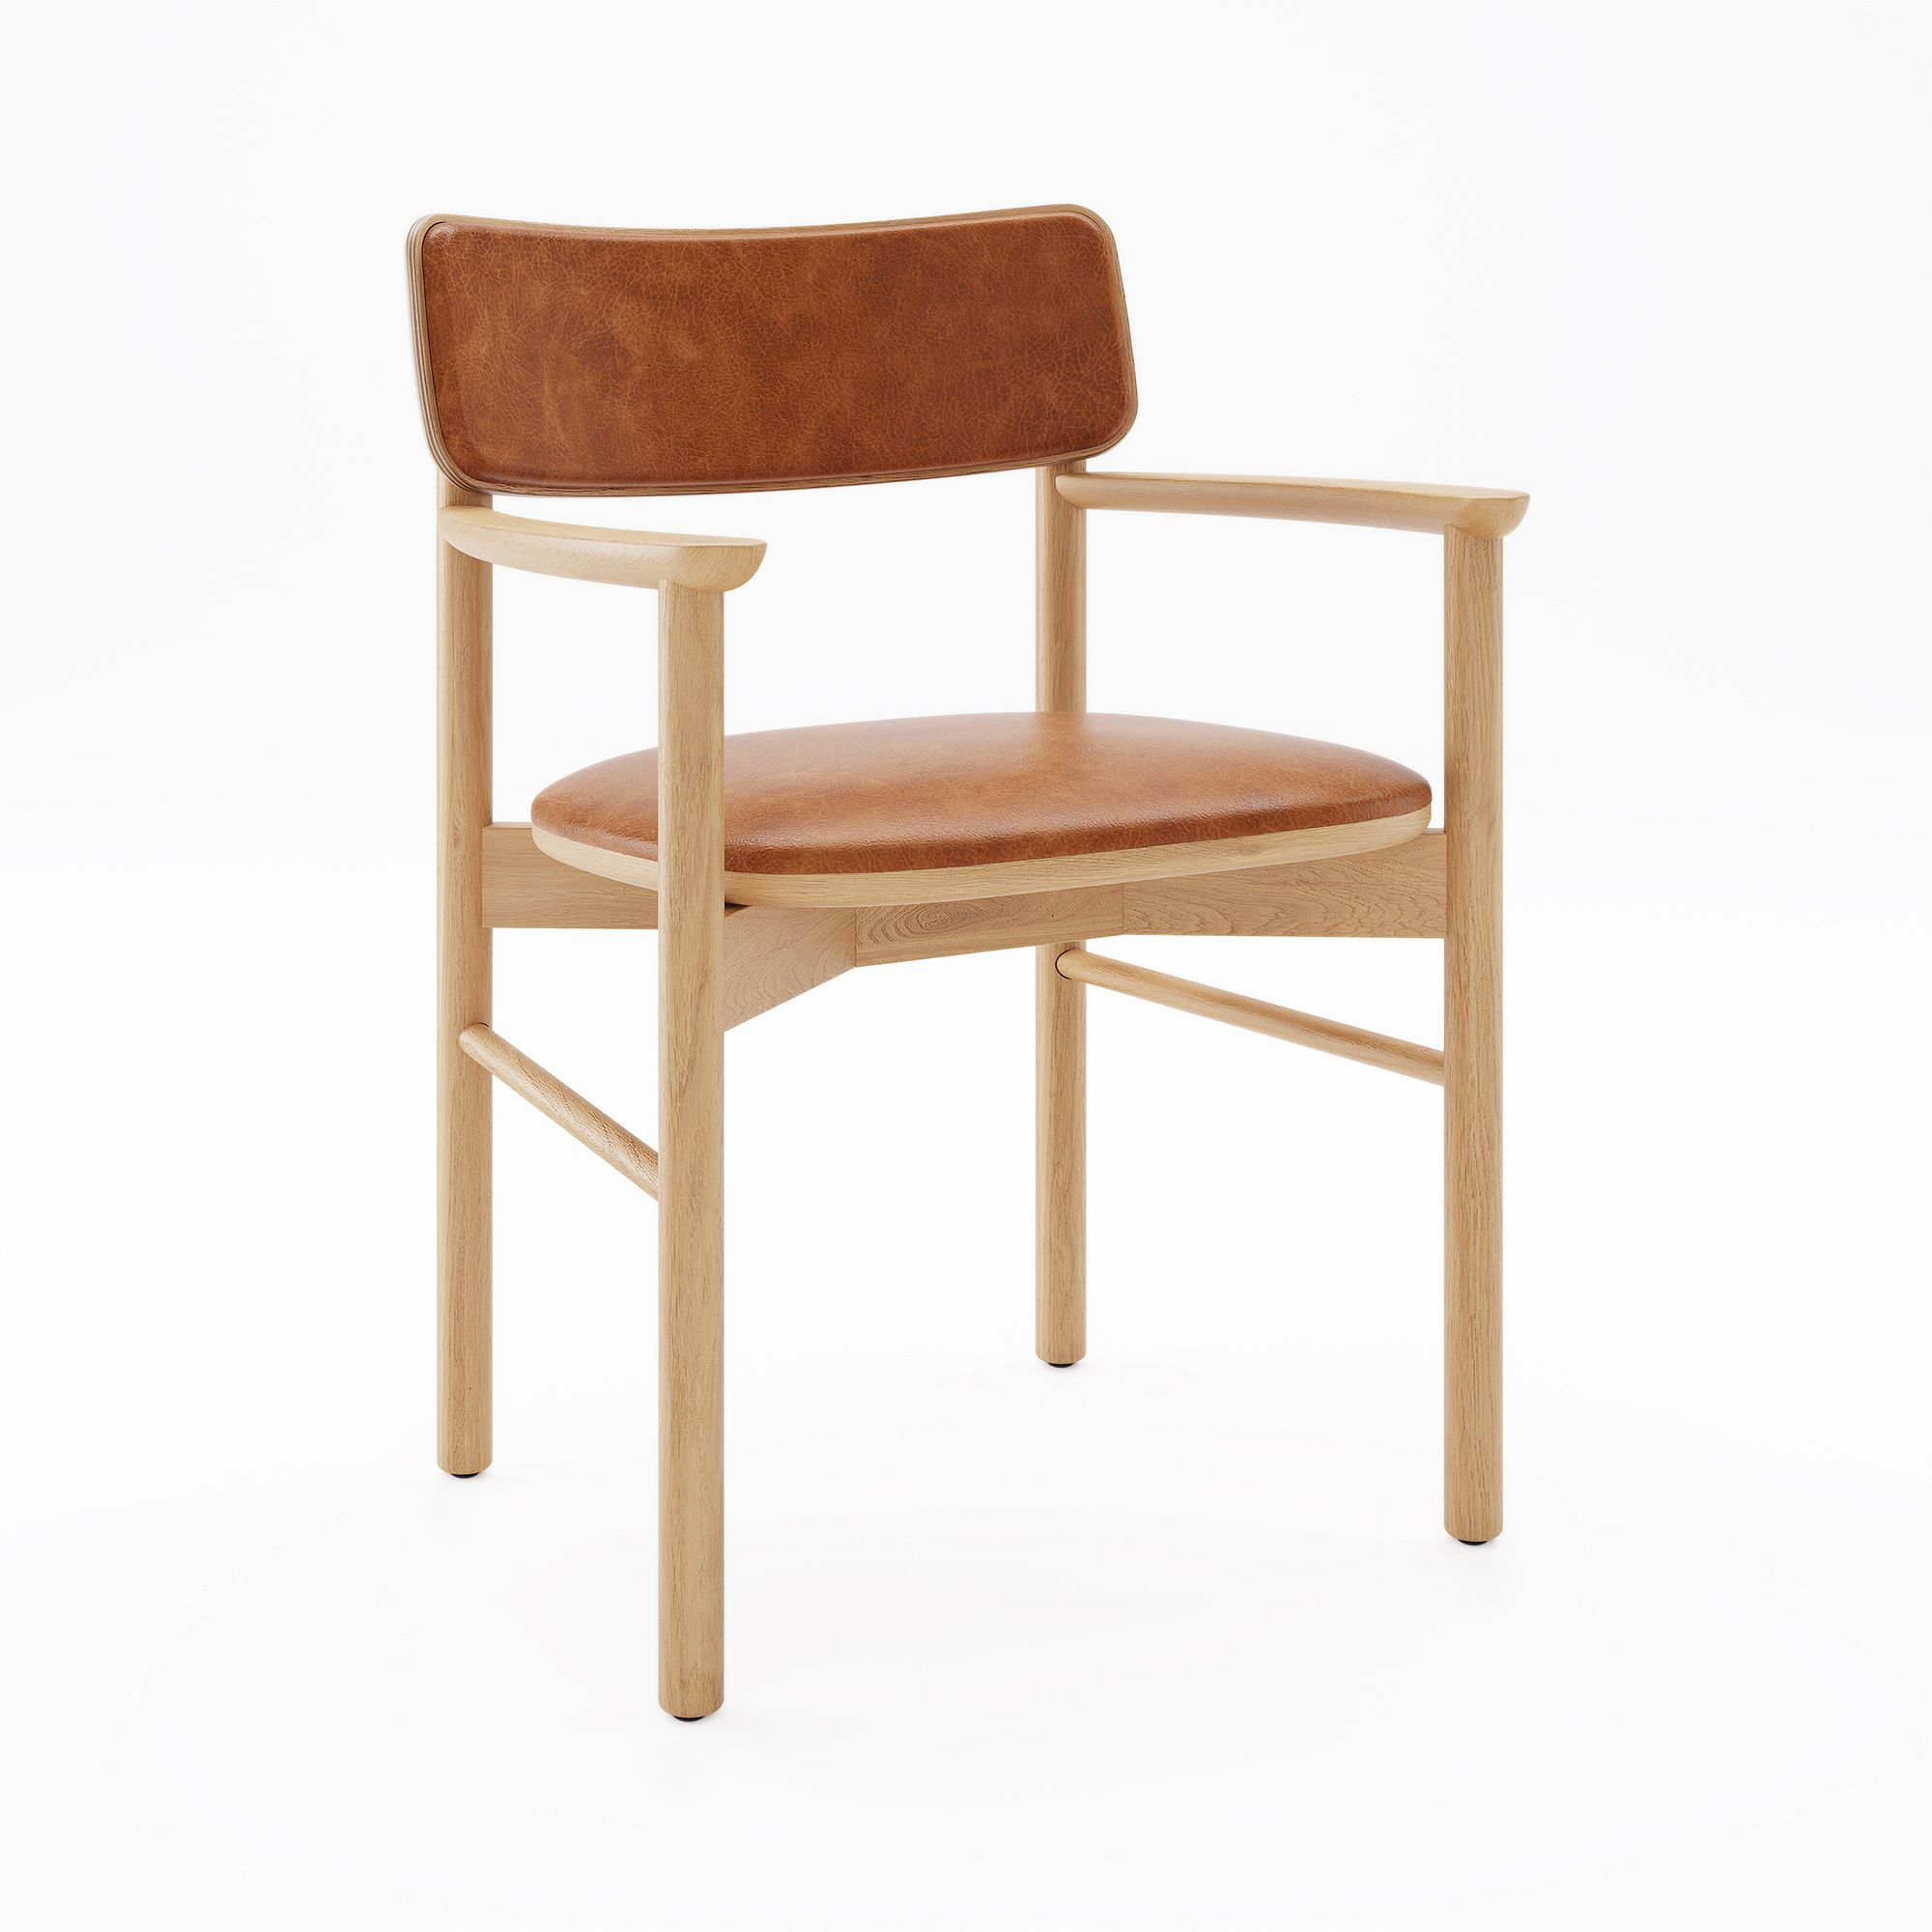 Sadove Dining Arm Chair | West Elm